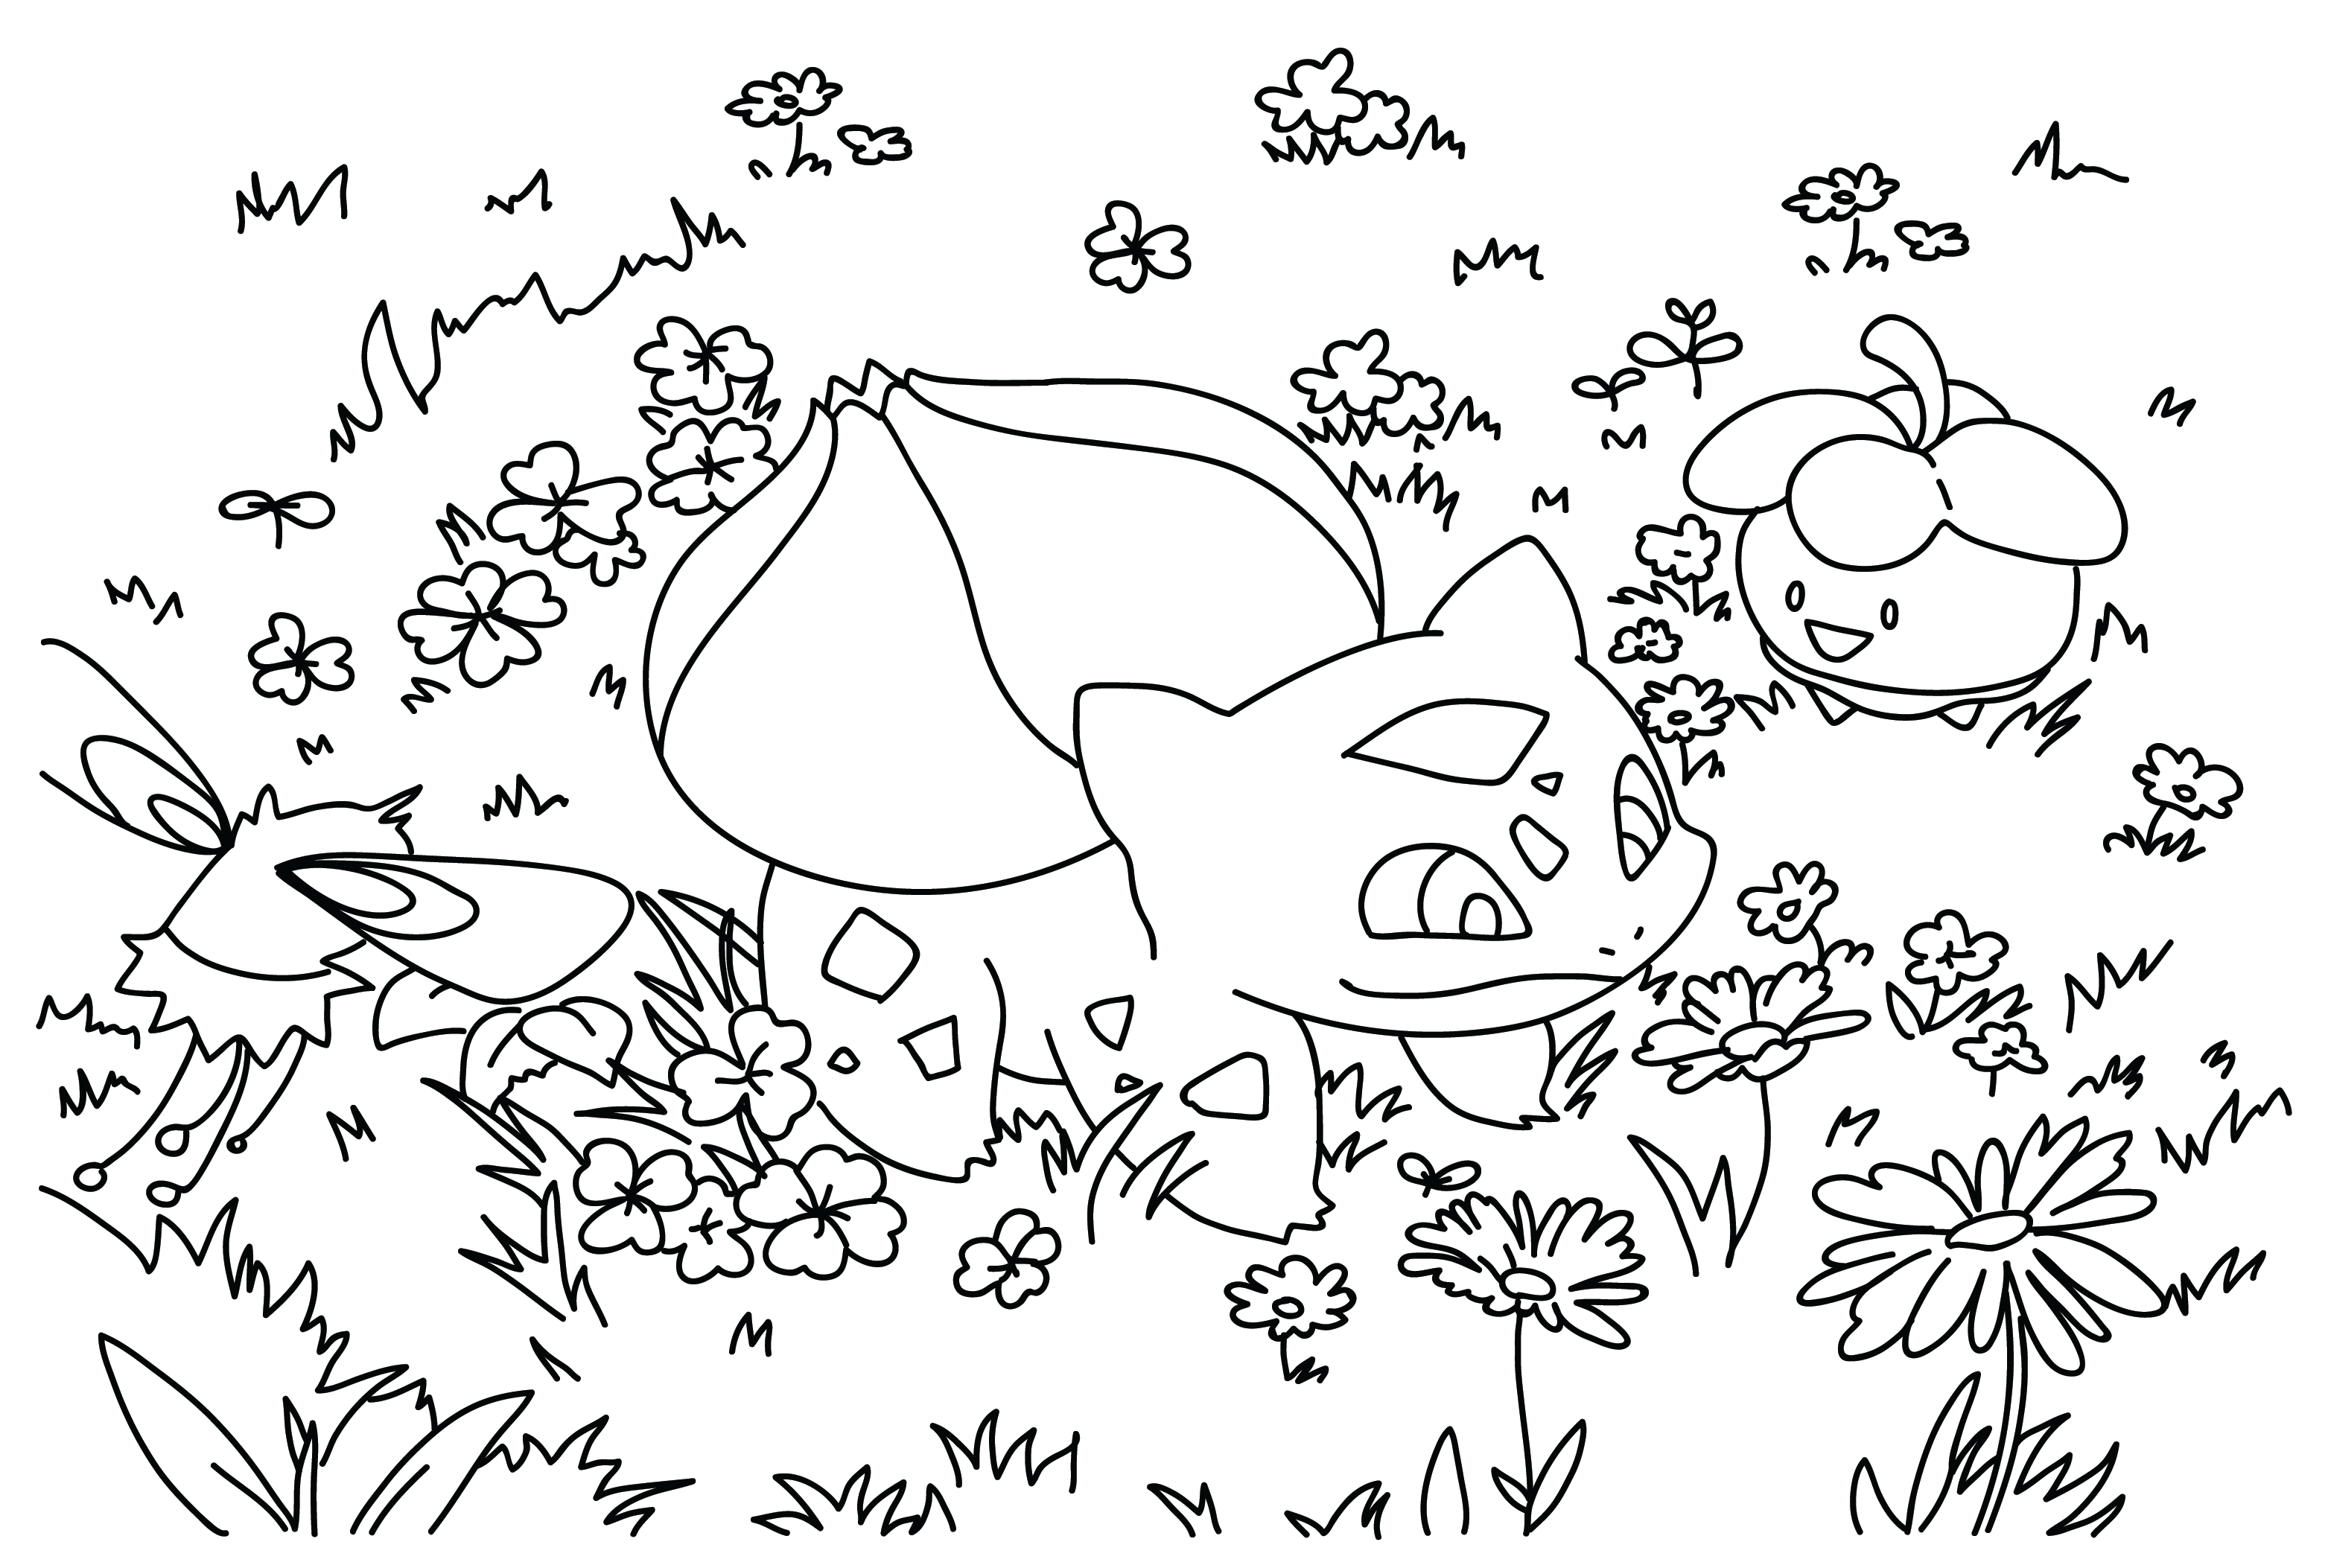 Bulbasaur Pictures to Color from Bulbasaur